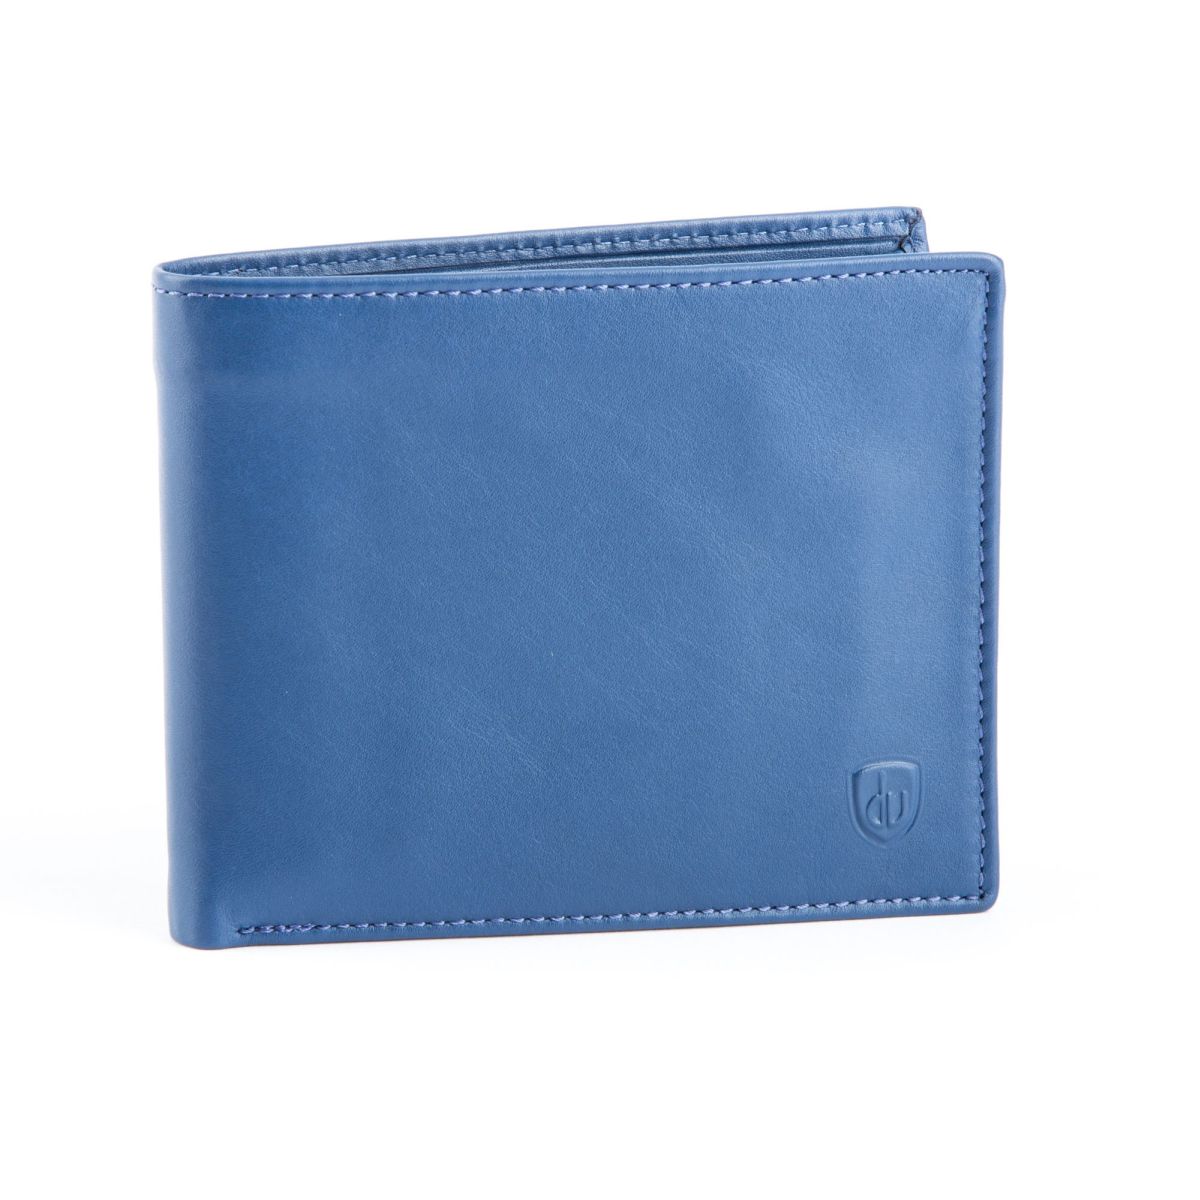 dv Leather Wallet for men with inner flap side - Blue